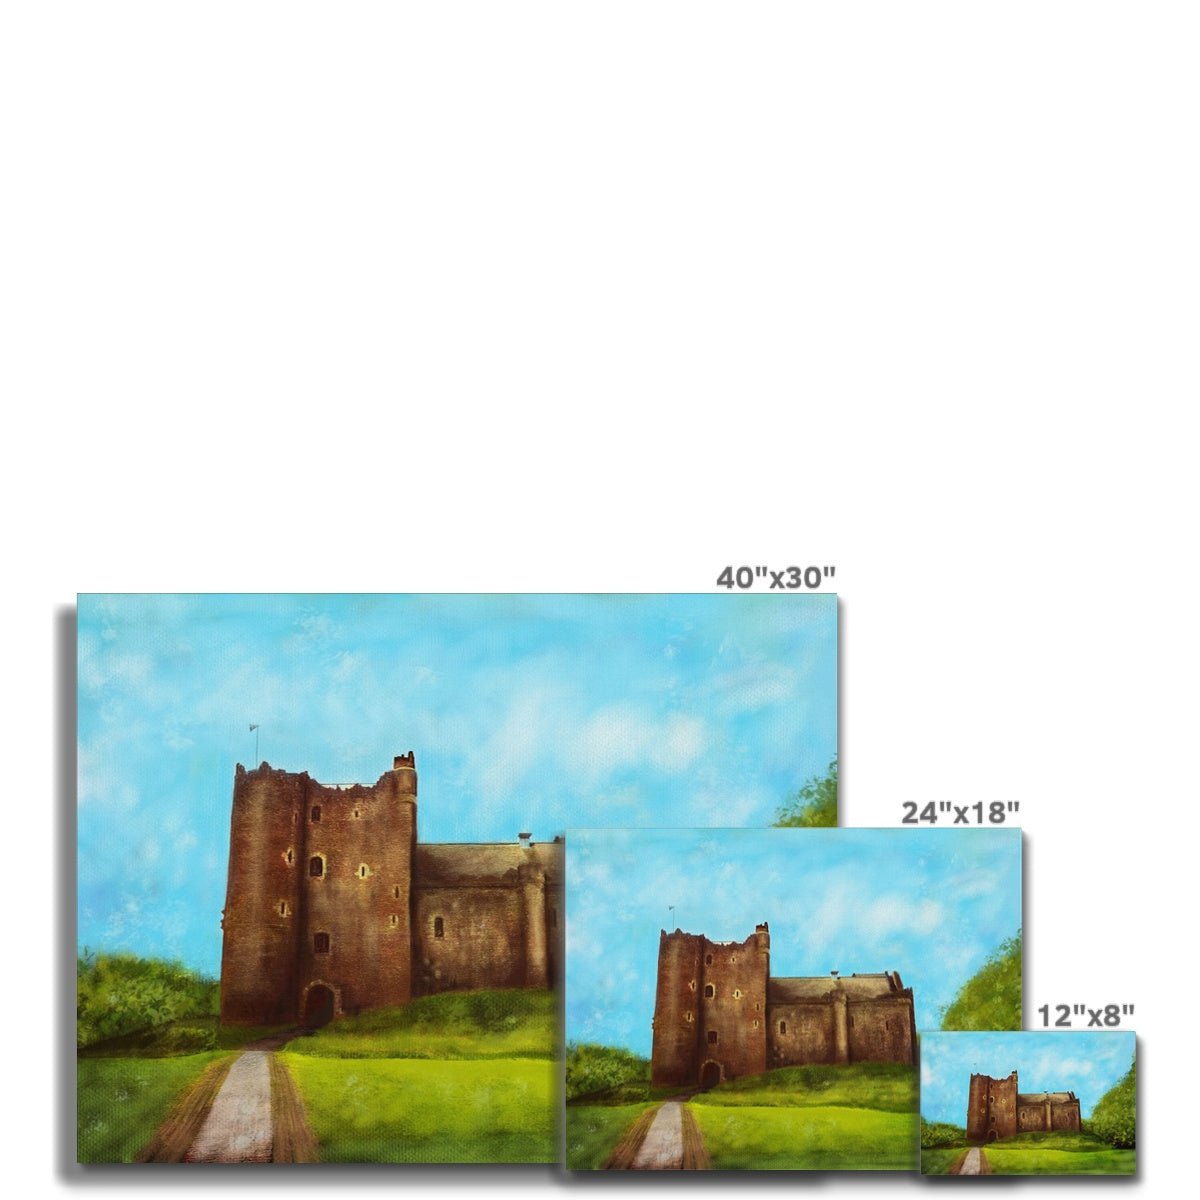 Doune Castle Painting | Canvas From Scotland-Contemporary Stretched Canvas Prints-Scottish Castles Art Gallery-Paintings, Prints, Homeware, Art Gifts From Scotland By Scottish Artist Kevin Hunter